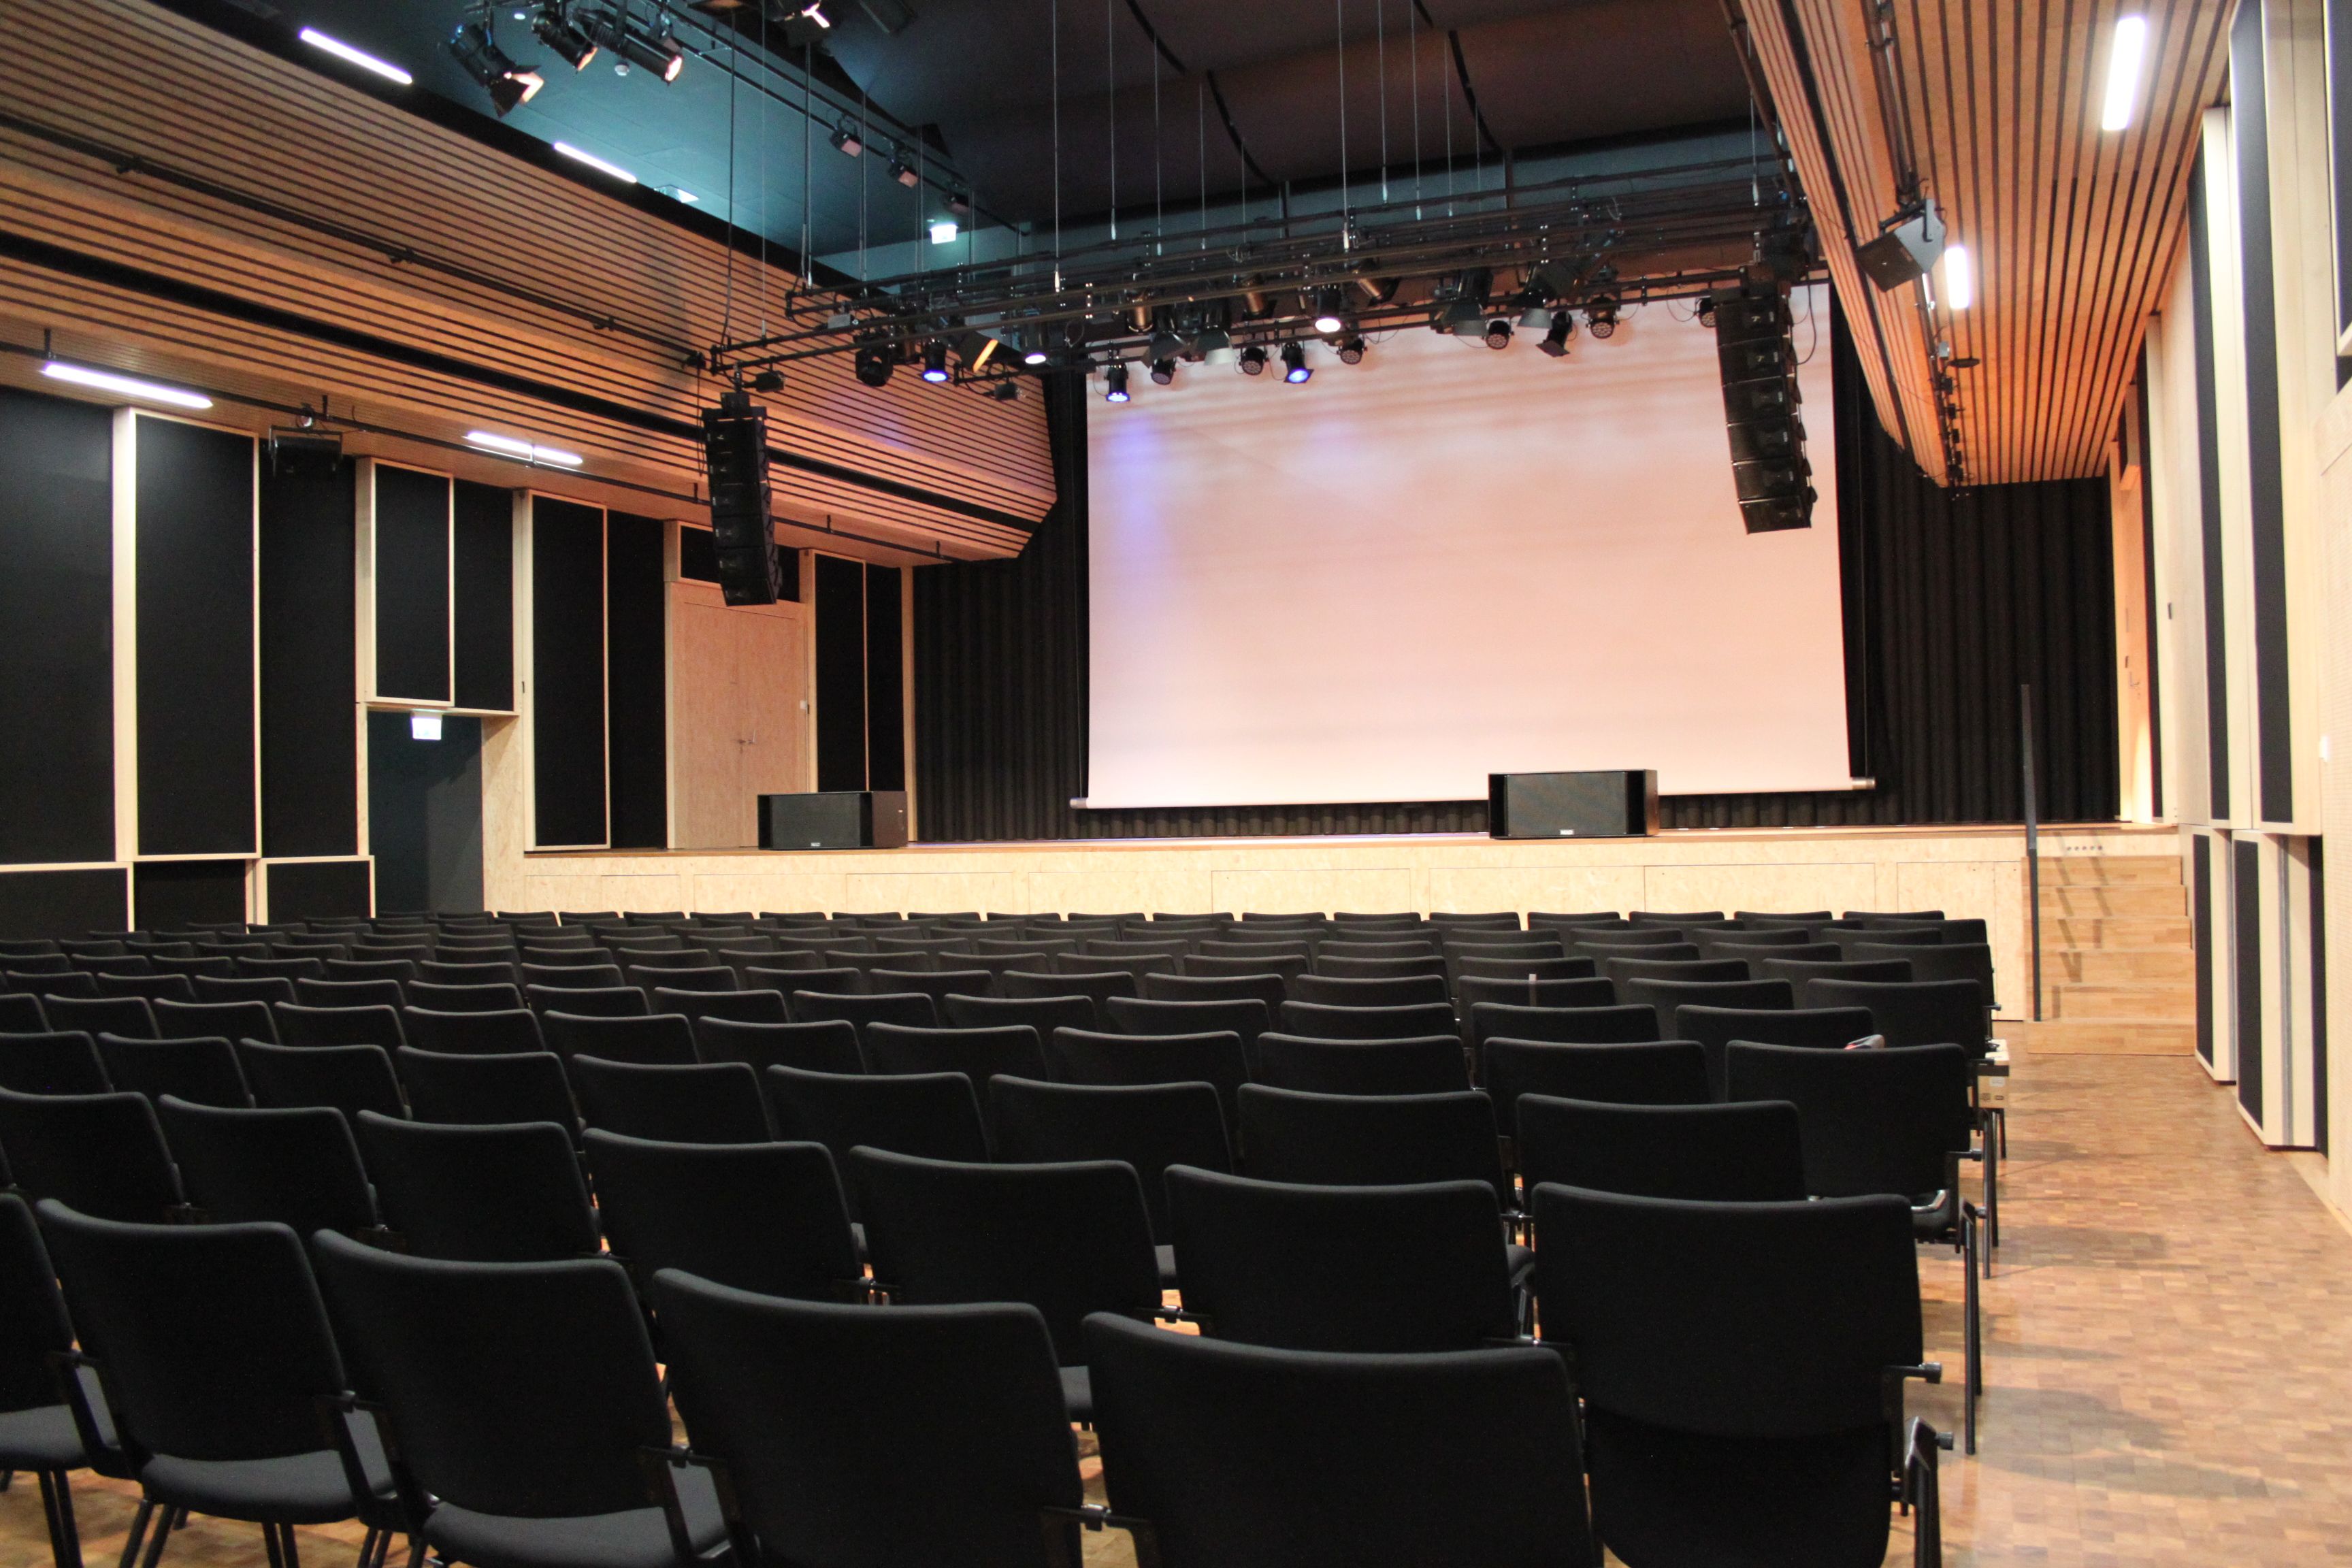 SWISS CONCERT HALL CHOOSES ALL-PURPOSE GEO S SOUND SYSTEM